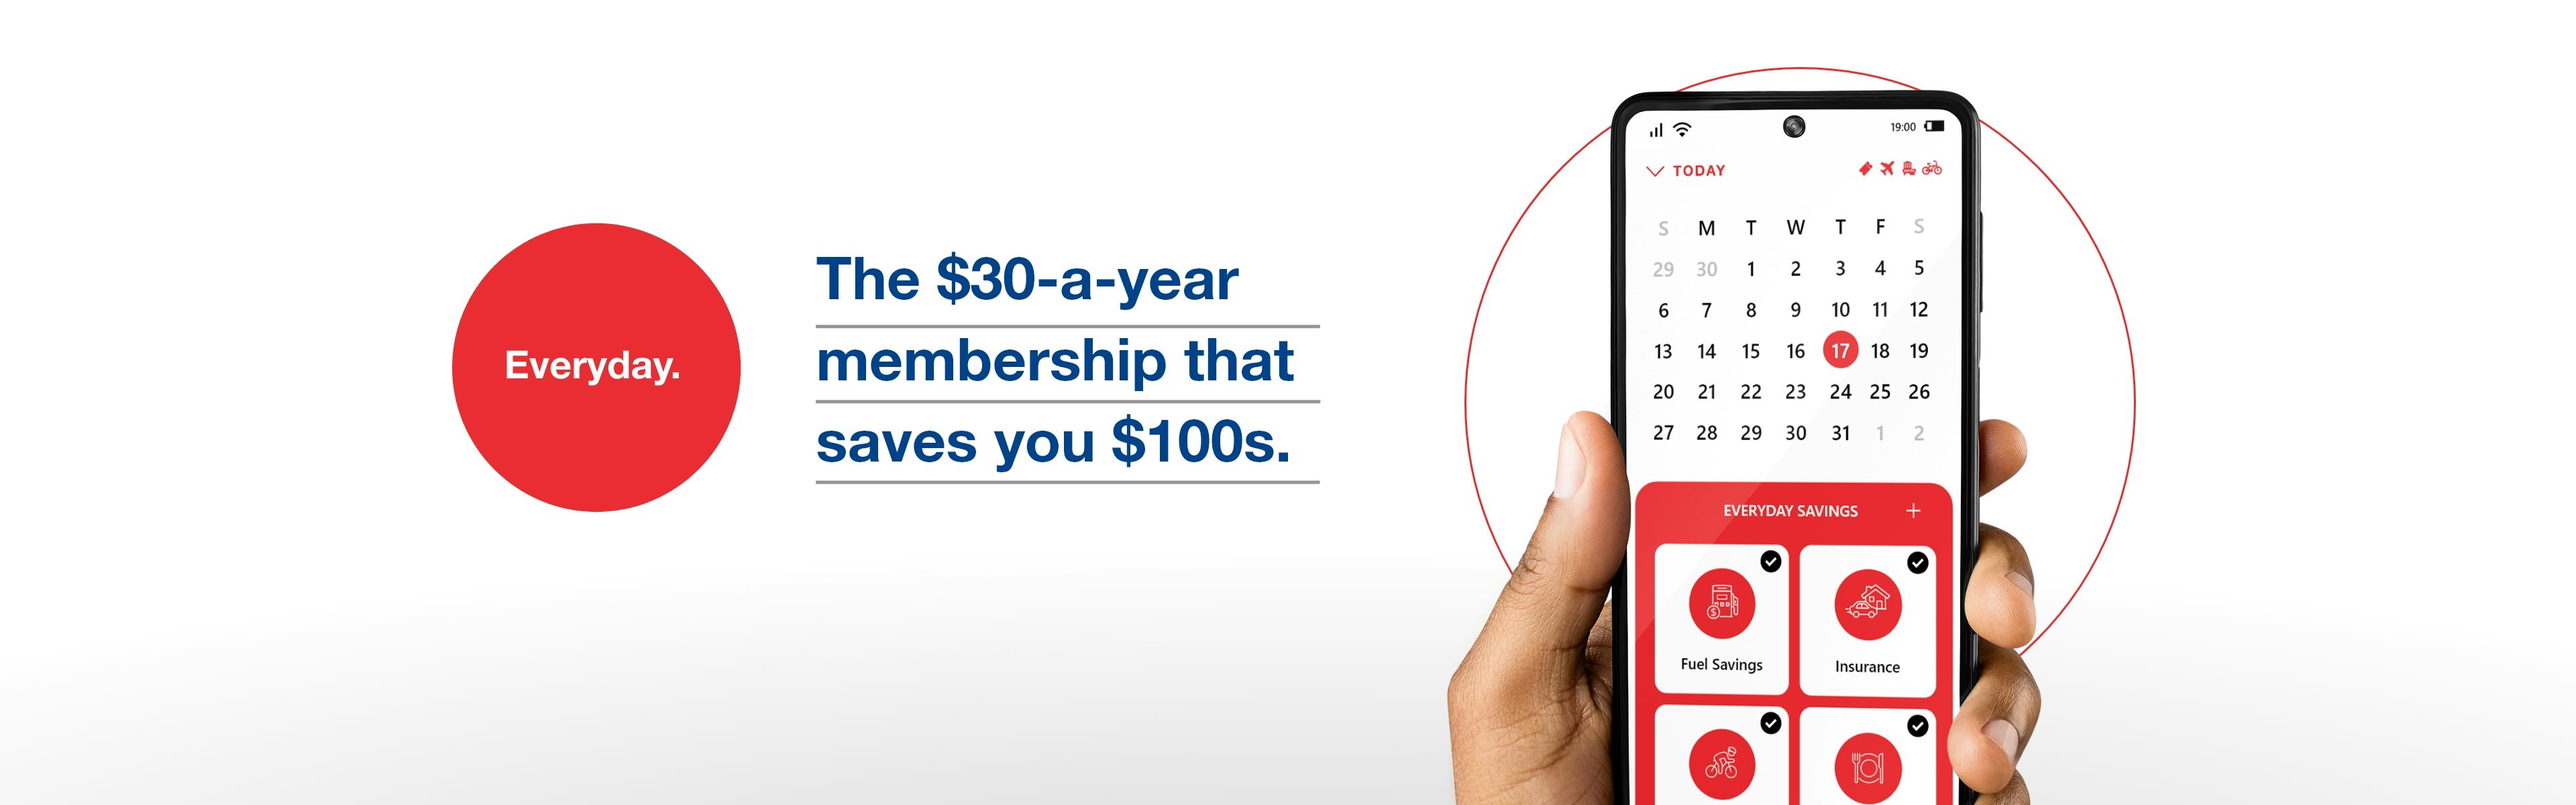 CAA Everyday. The $30-a-year membership that saves you $100s. Picture of hand holding cell phone with calendar app open.